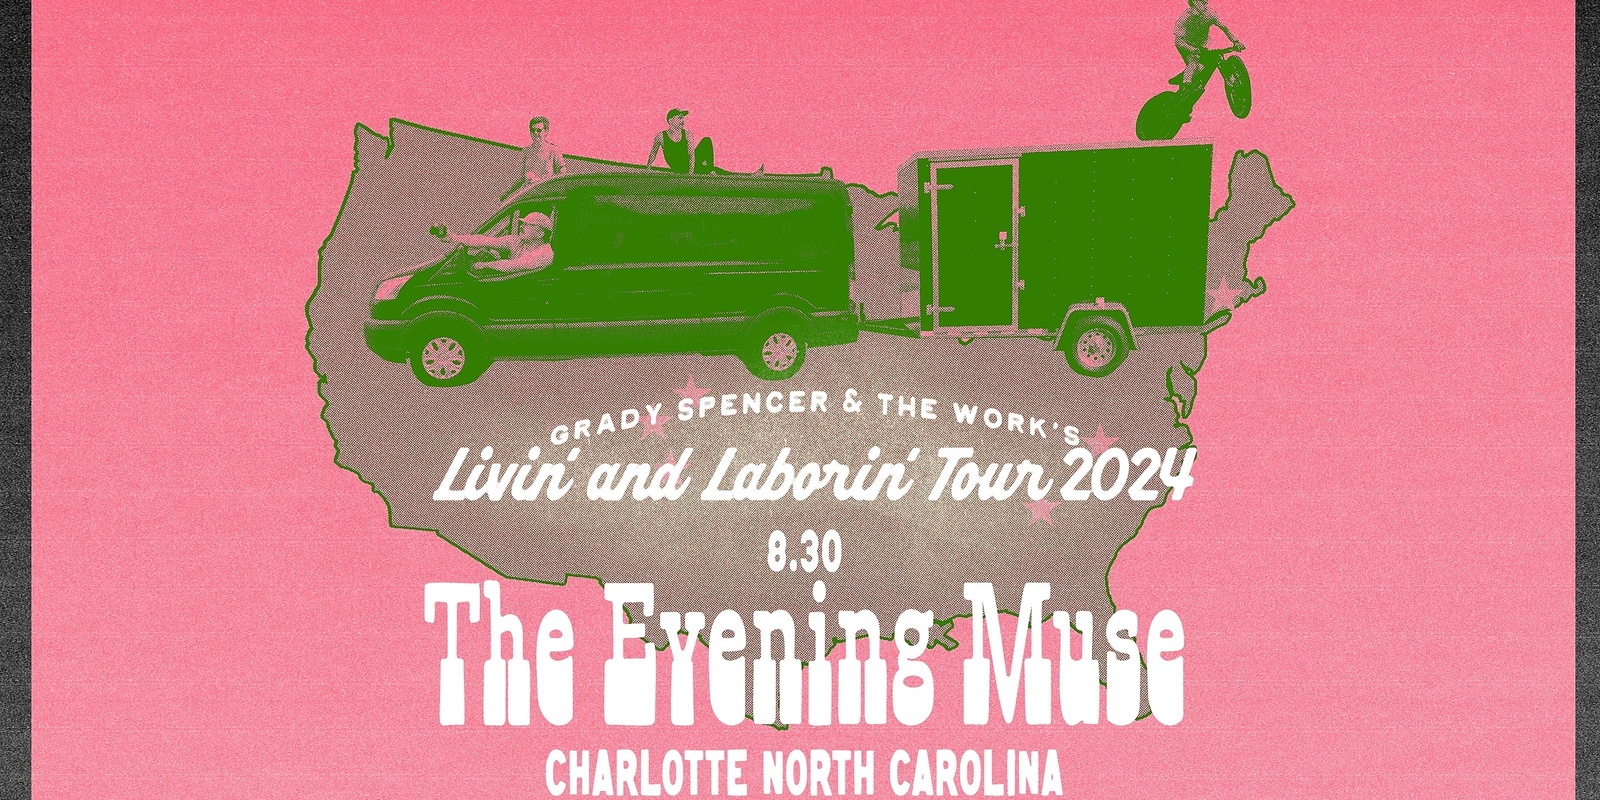 Banner image for Grady Spencer & the Work